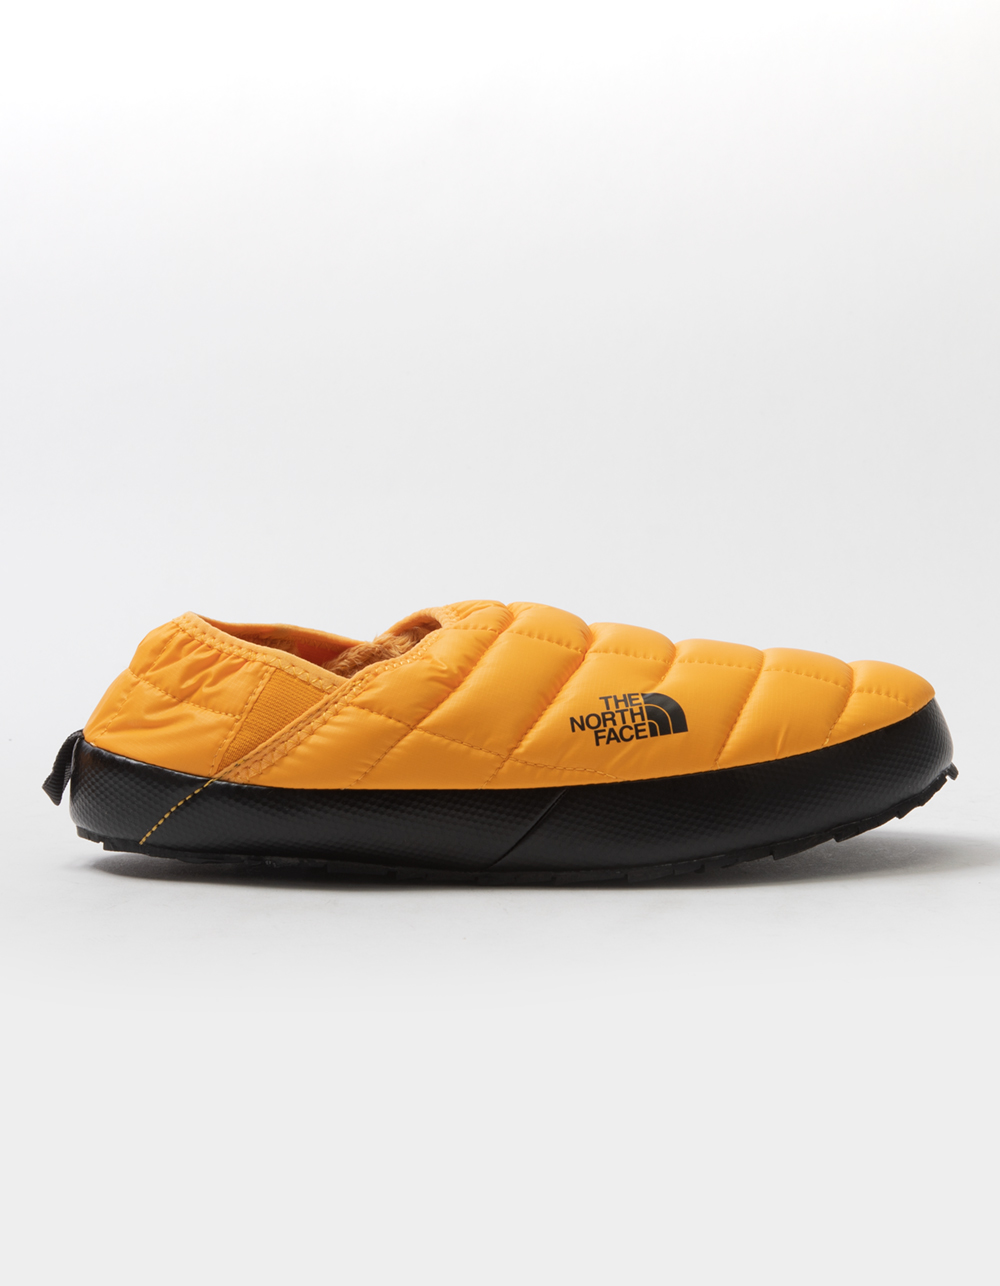 THE NORTH FACE Thermoball™ Traction Mule V Shoes - YELLOW | Tillys